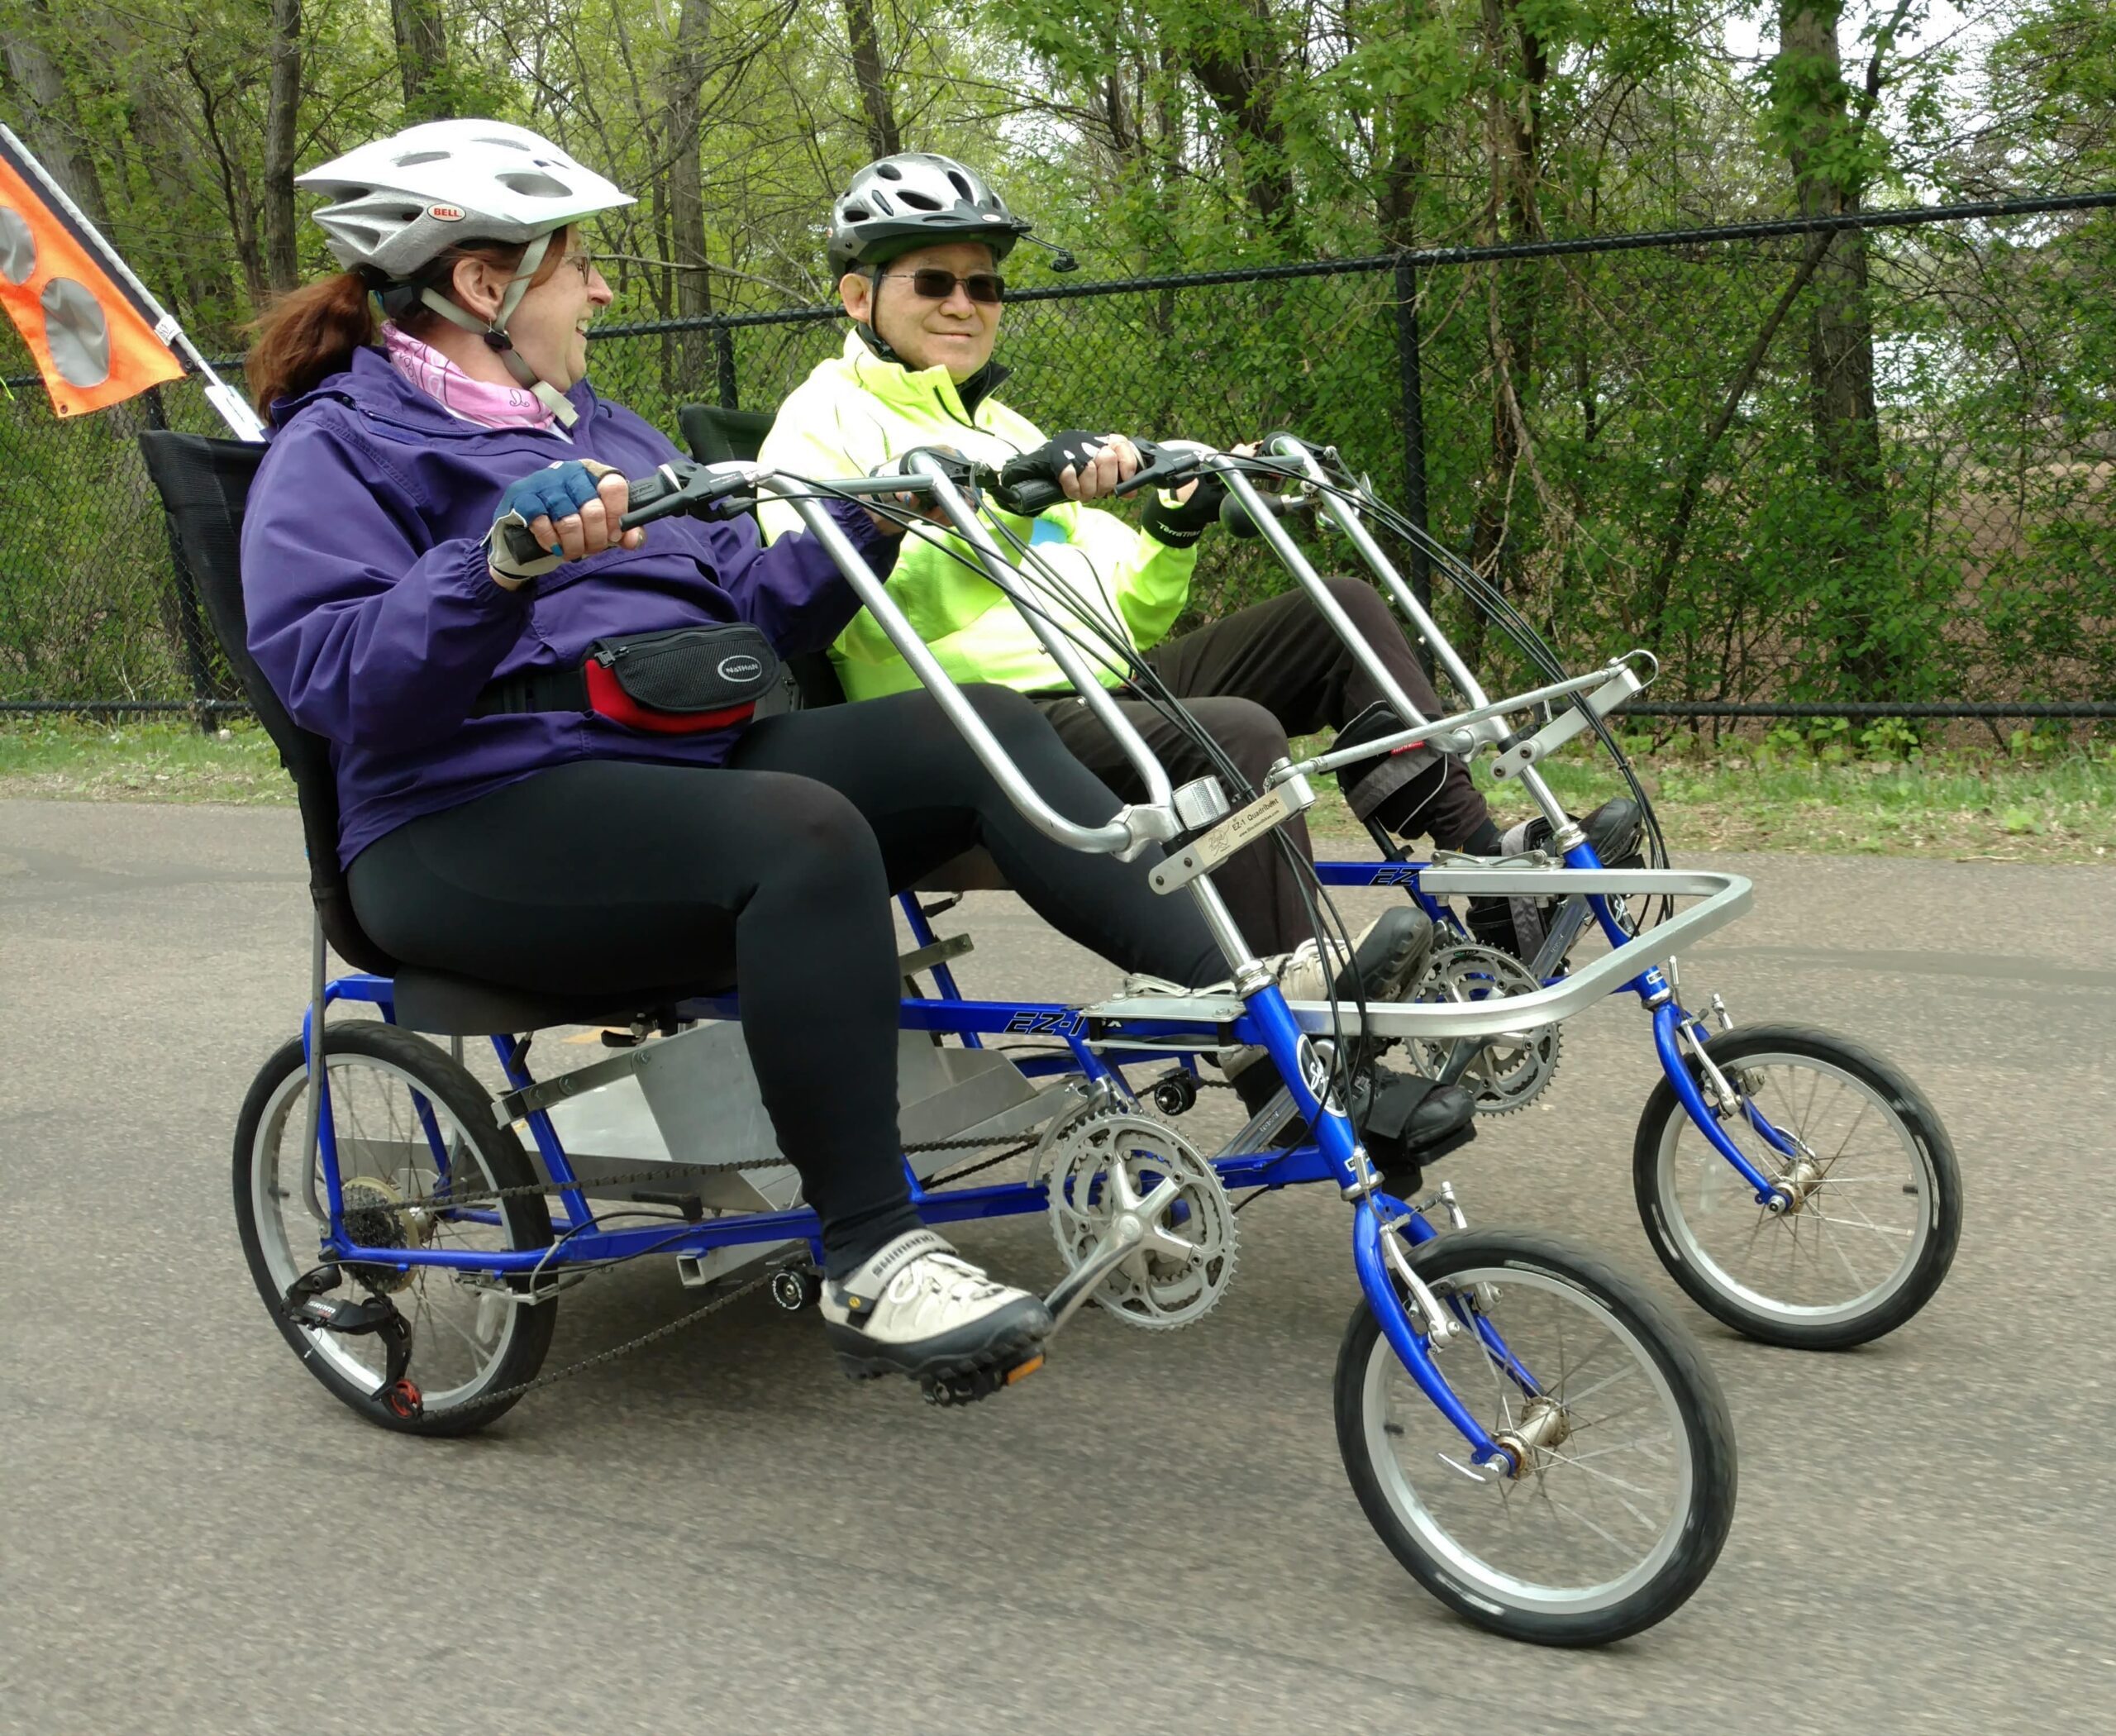 Bike Buddy. Great Tandem Riding for kids and adults with autism